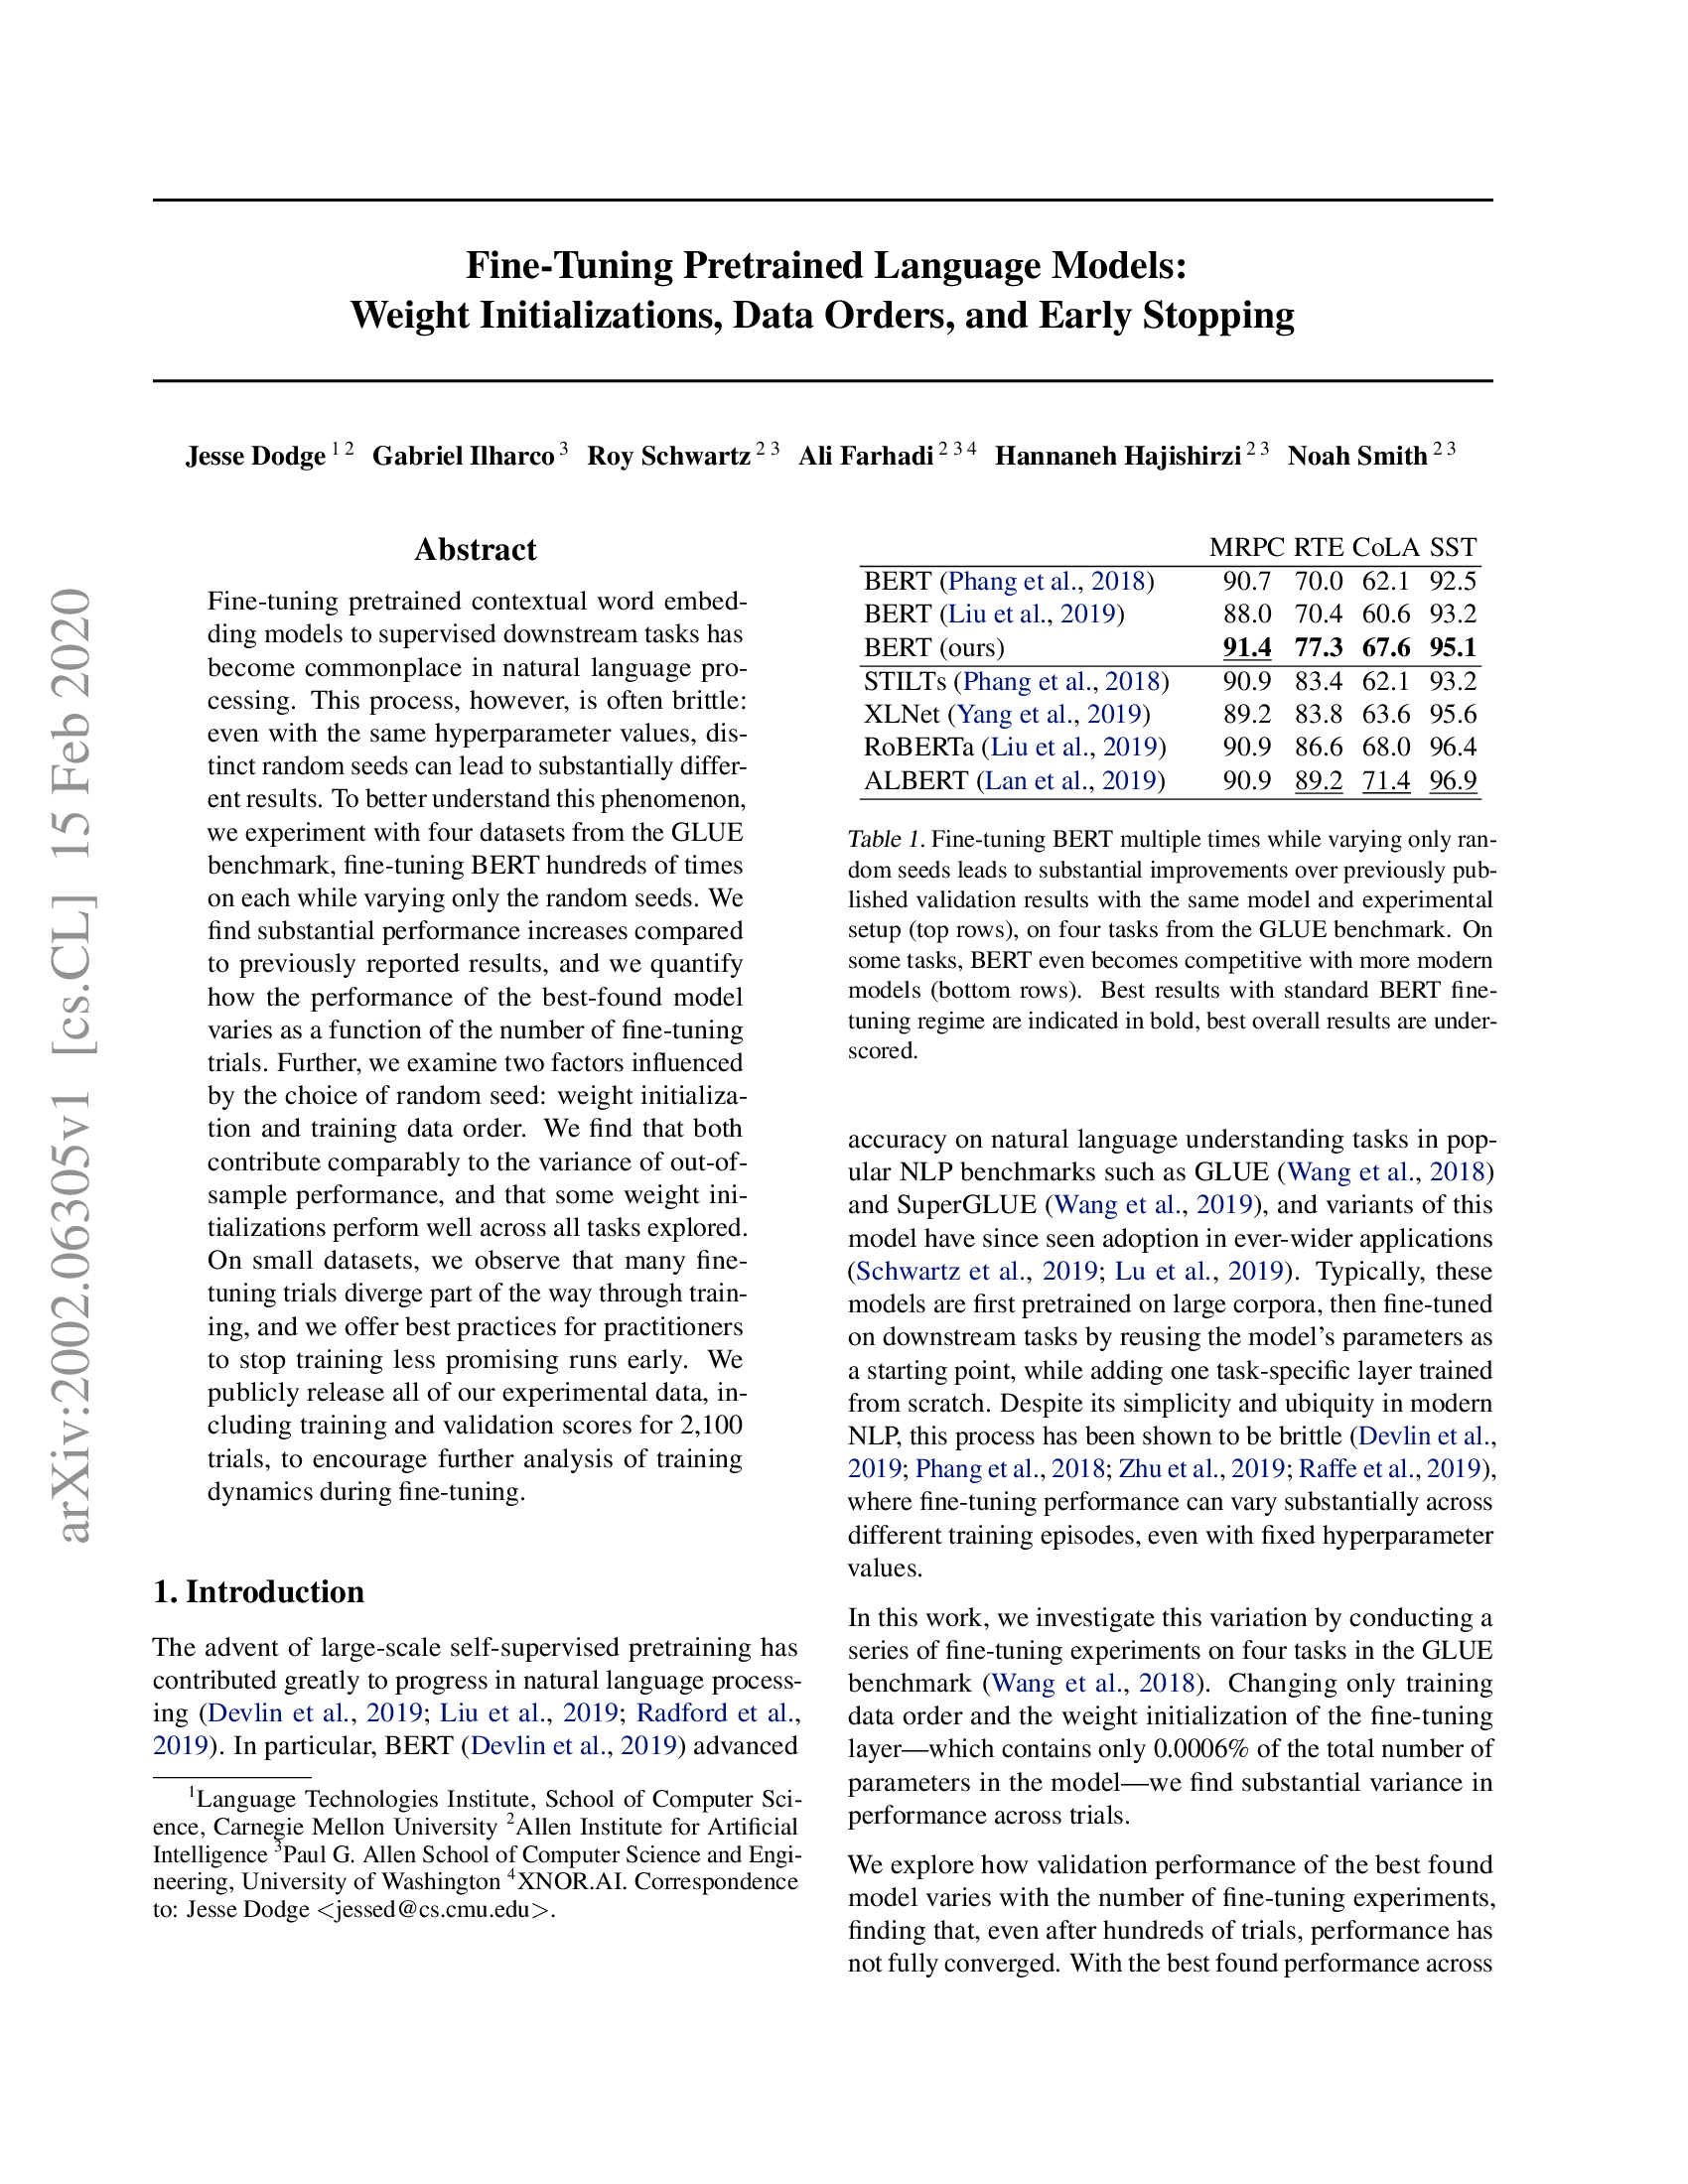 Fine-Tuning Pretrained Language Models: Weight Initializations, Data Orders, and Early Stopping